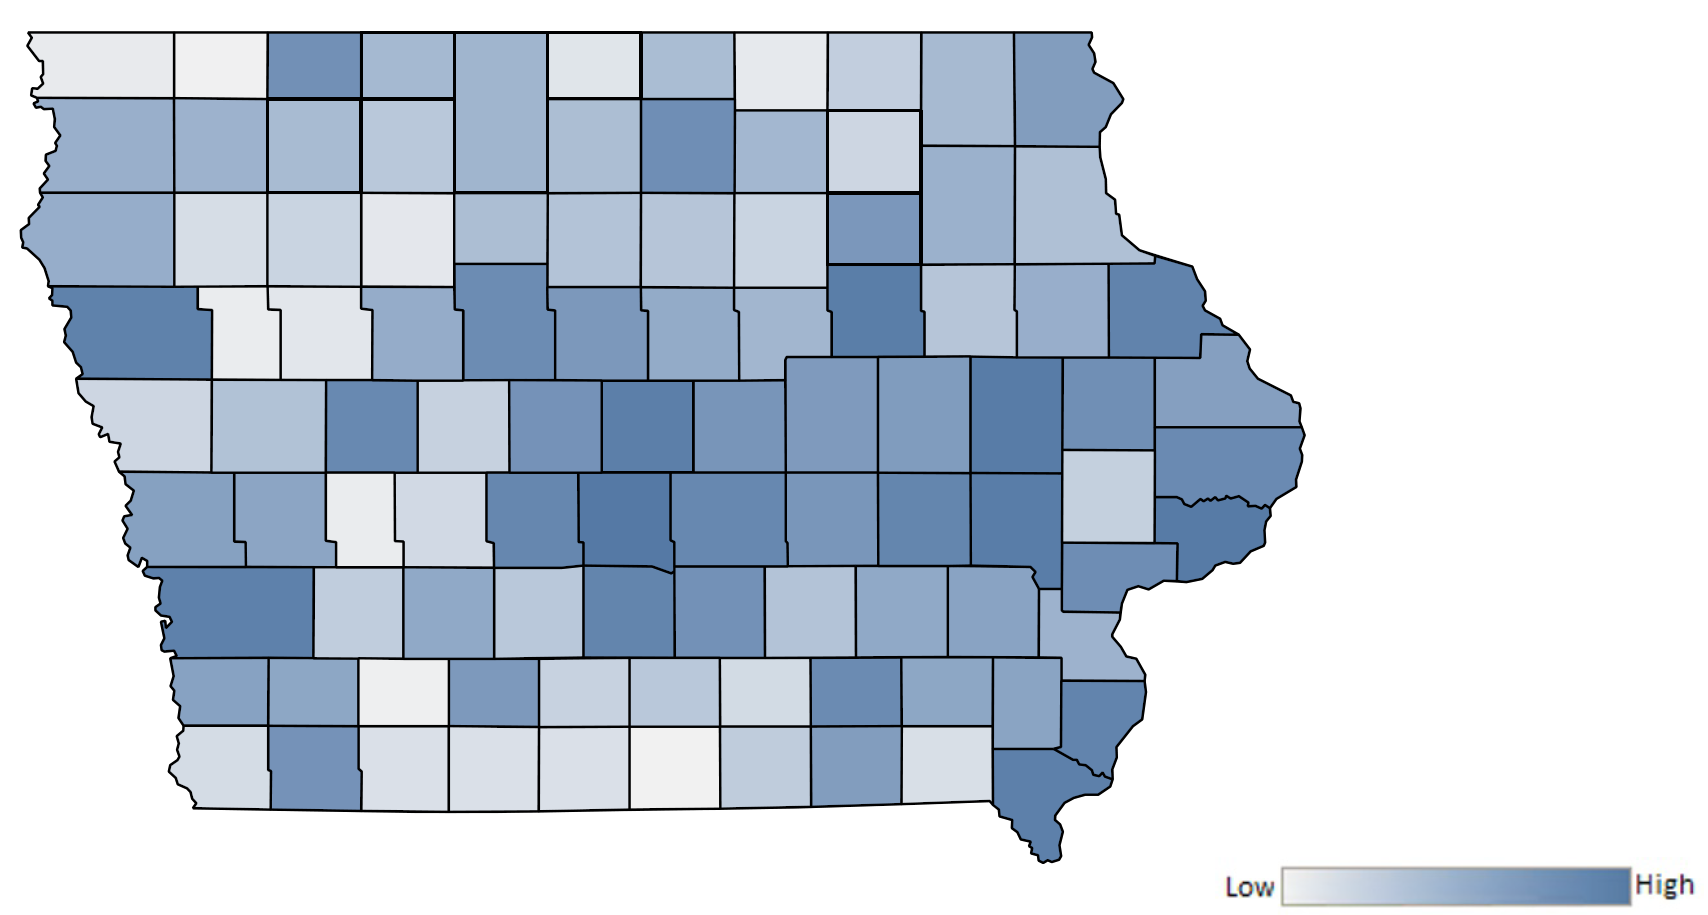 Map of Iowa counties indicating relative number of complaints from low to high. See attached CSV file for complaint data by jurisdiction.